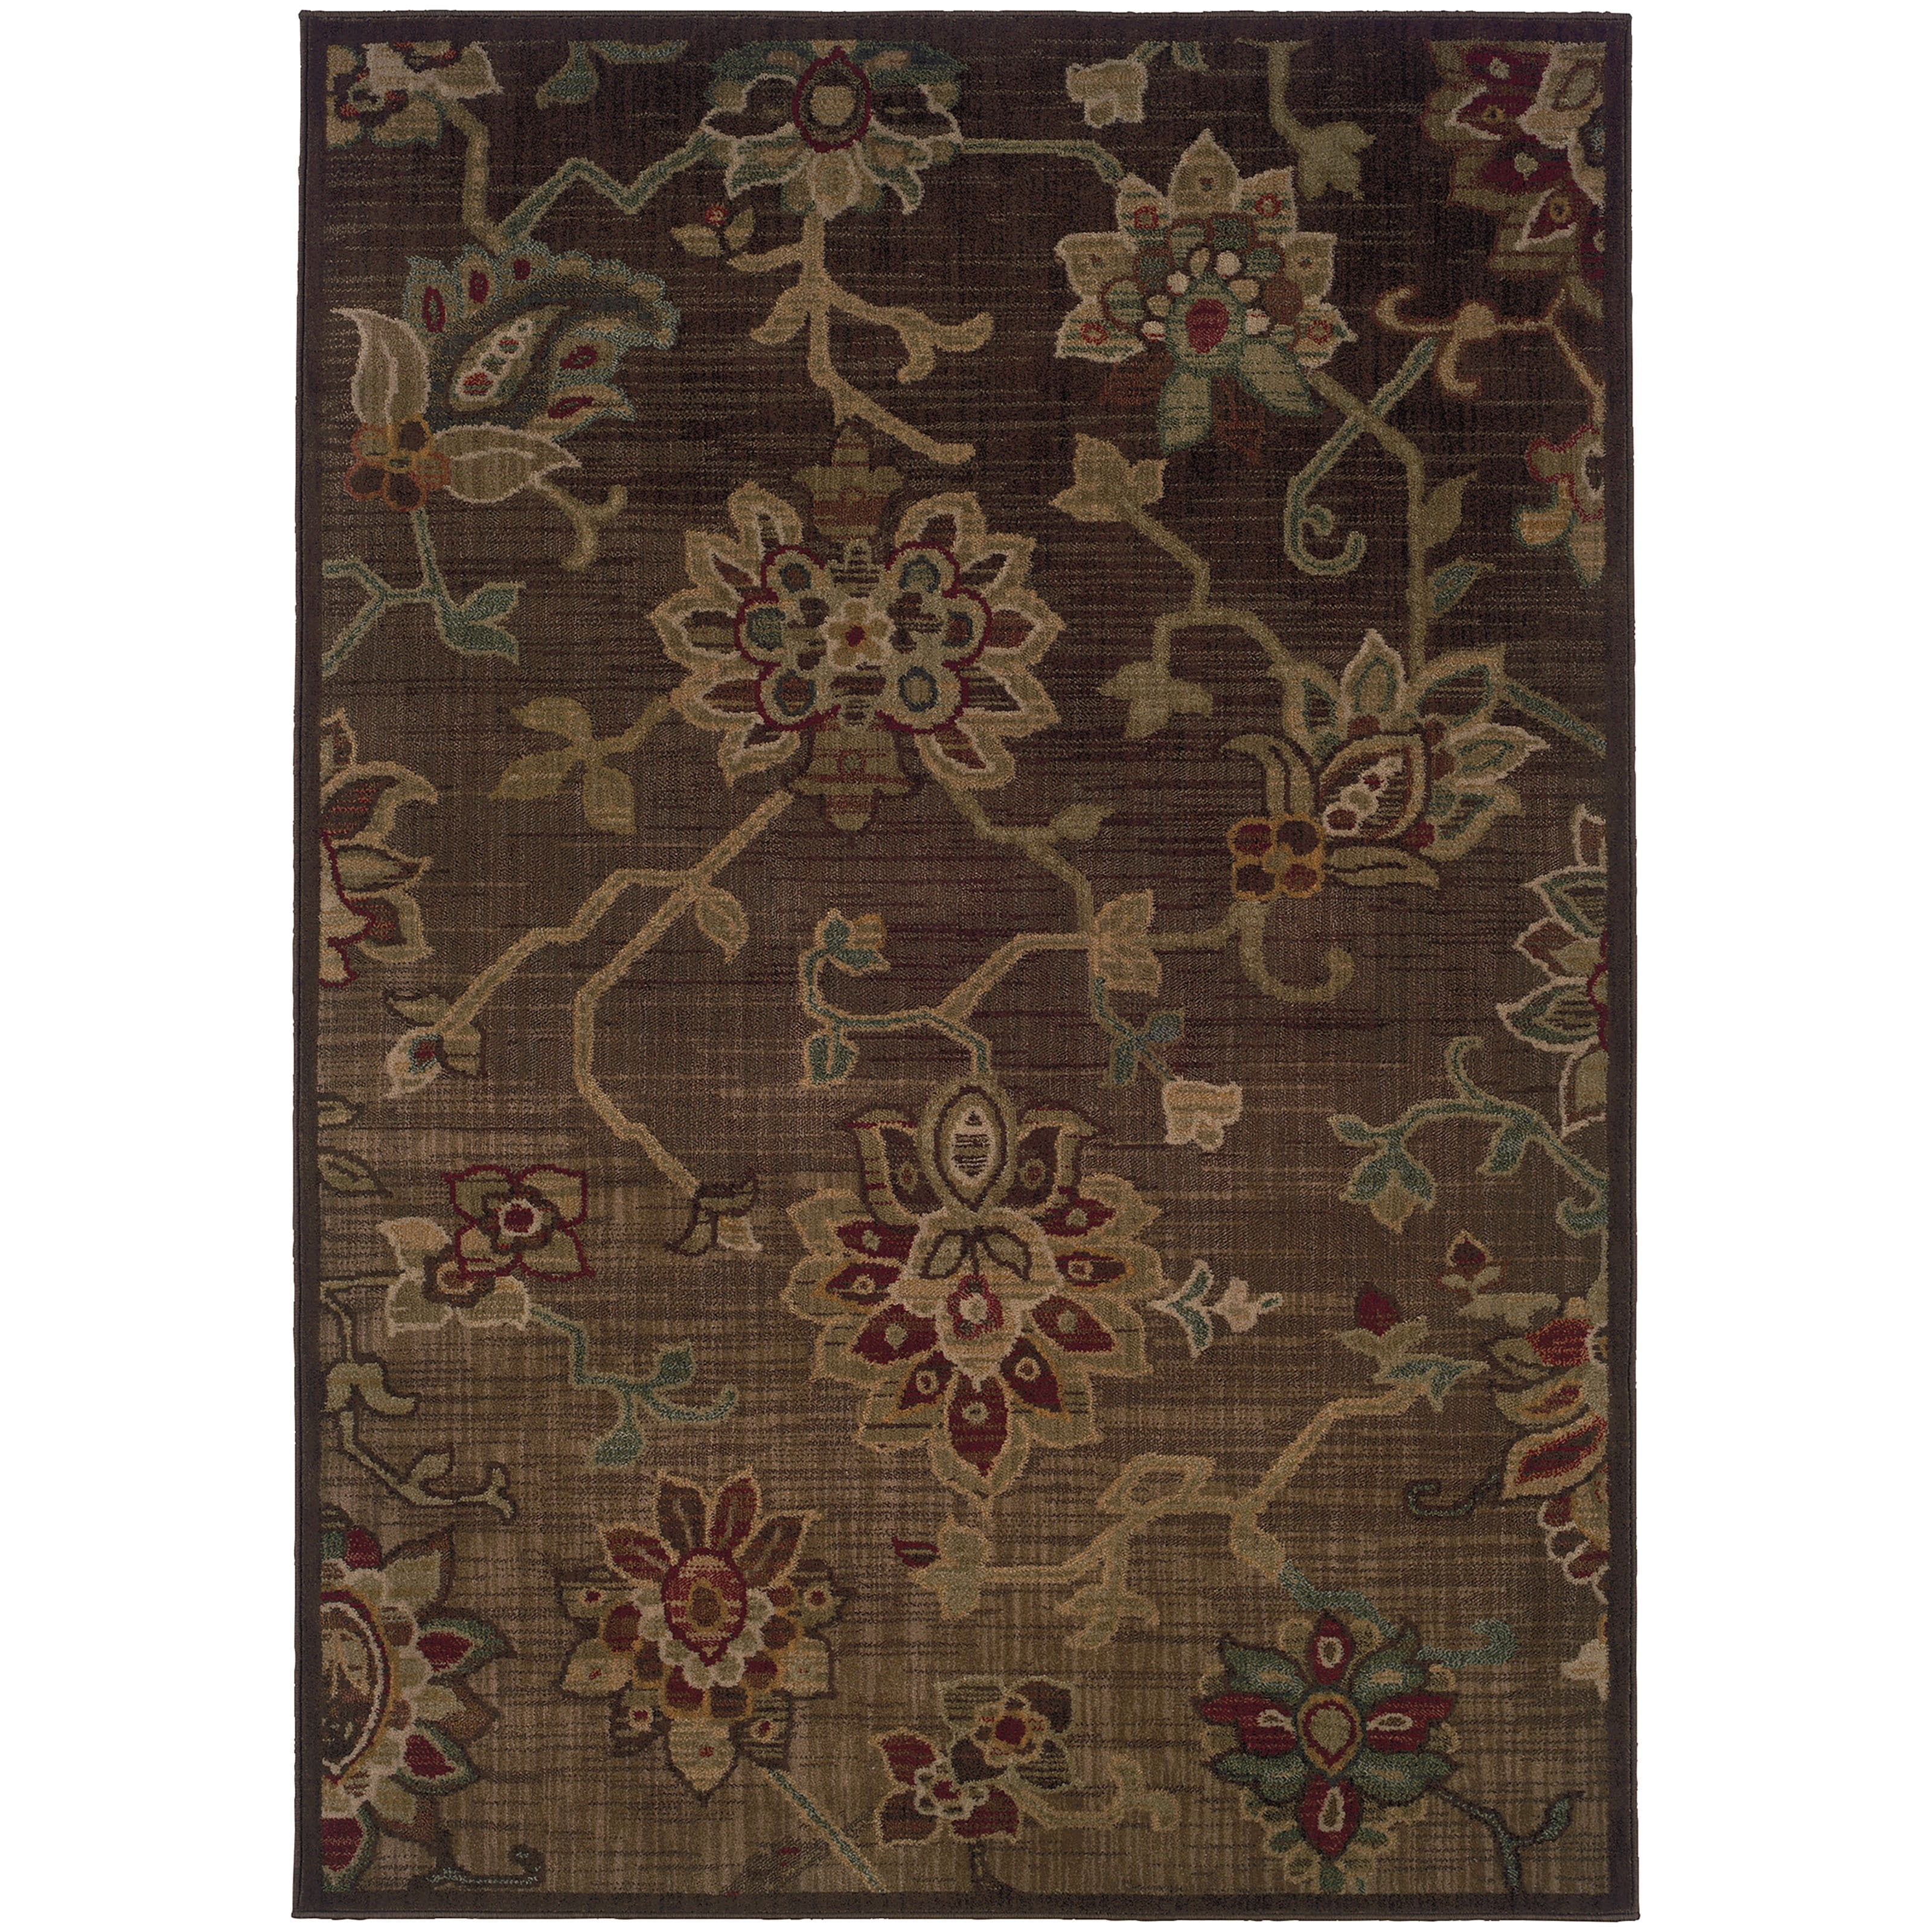 Bedroom Green Style Haven Ellington Borderless Traditional Area Rug Brown/Green 3'10 x 5'5 0.25-0.5 inch 4' x 6' Living Room